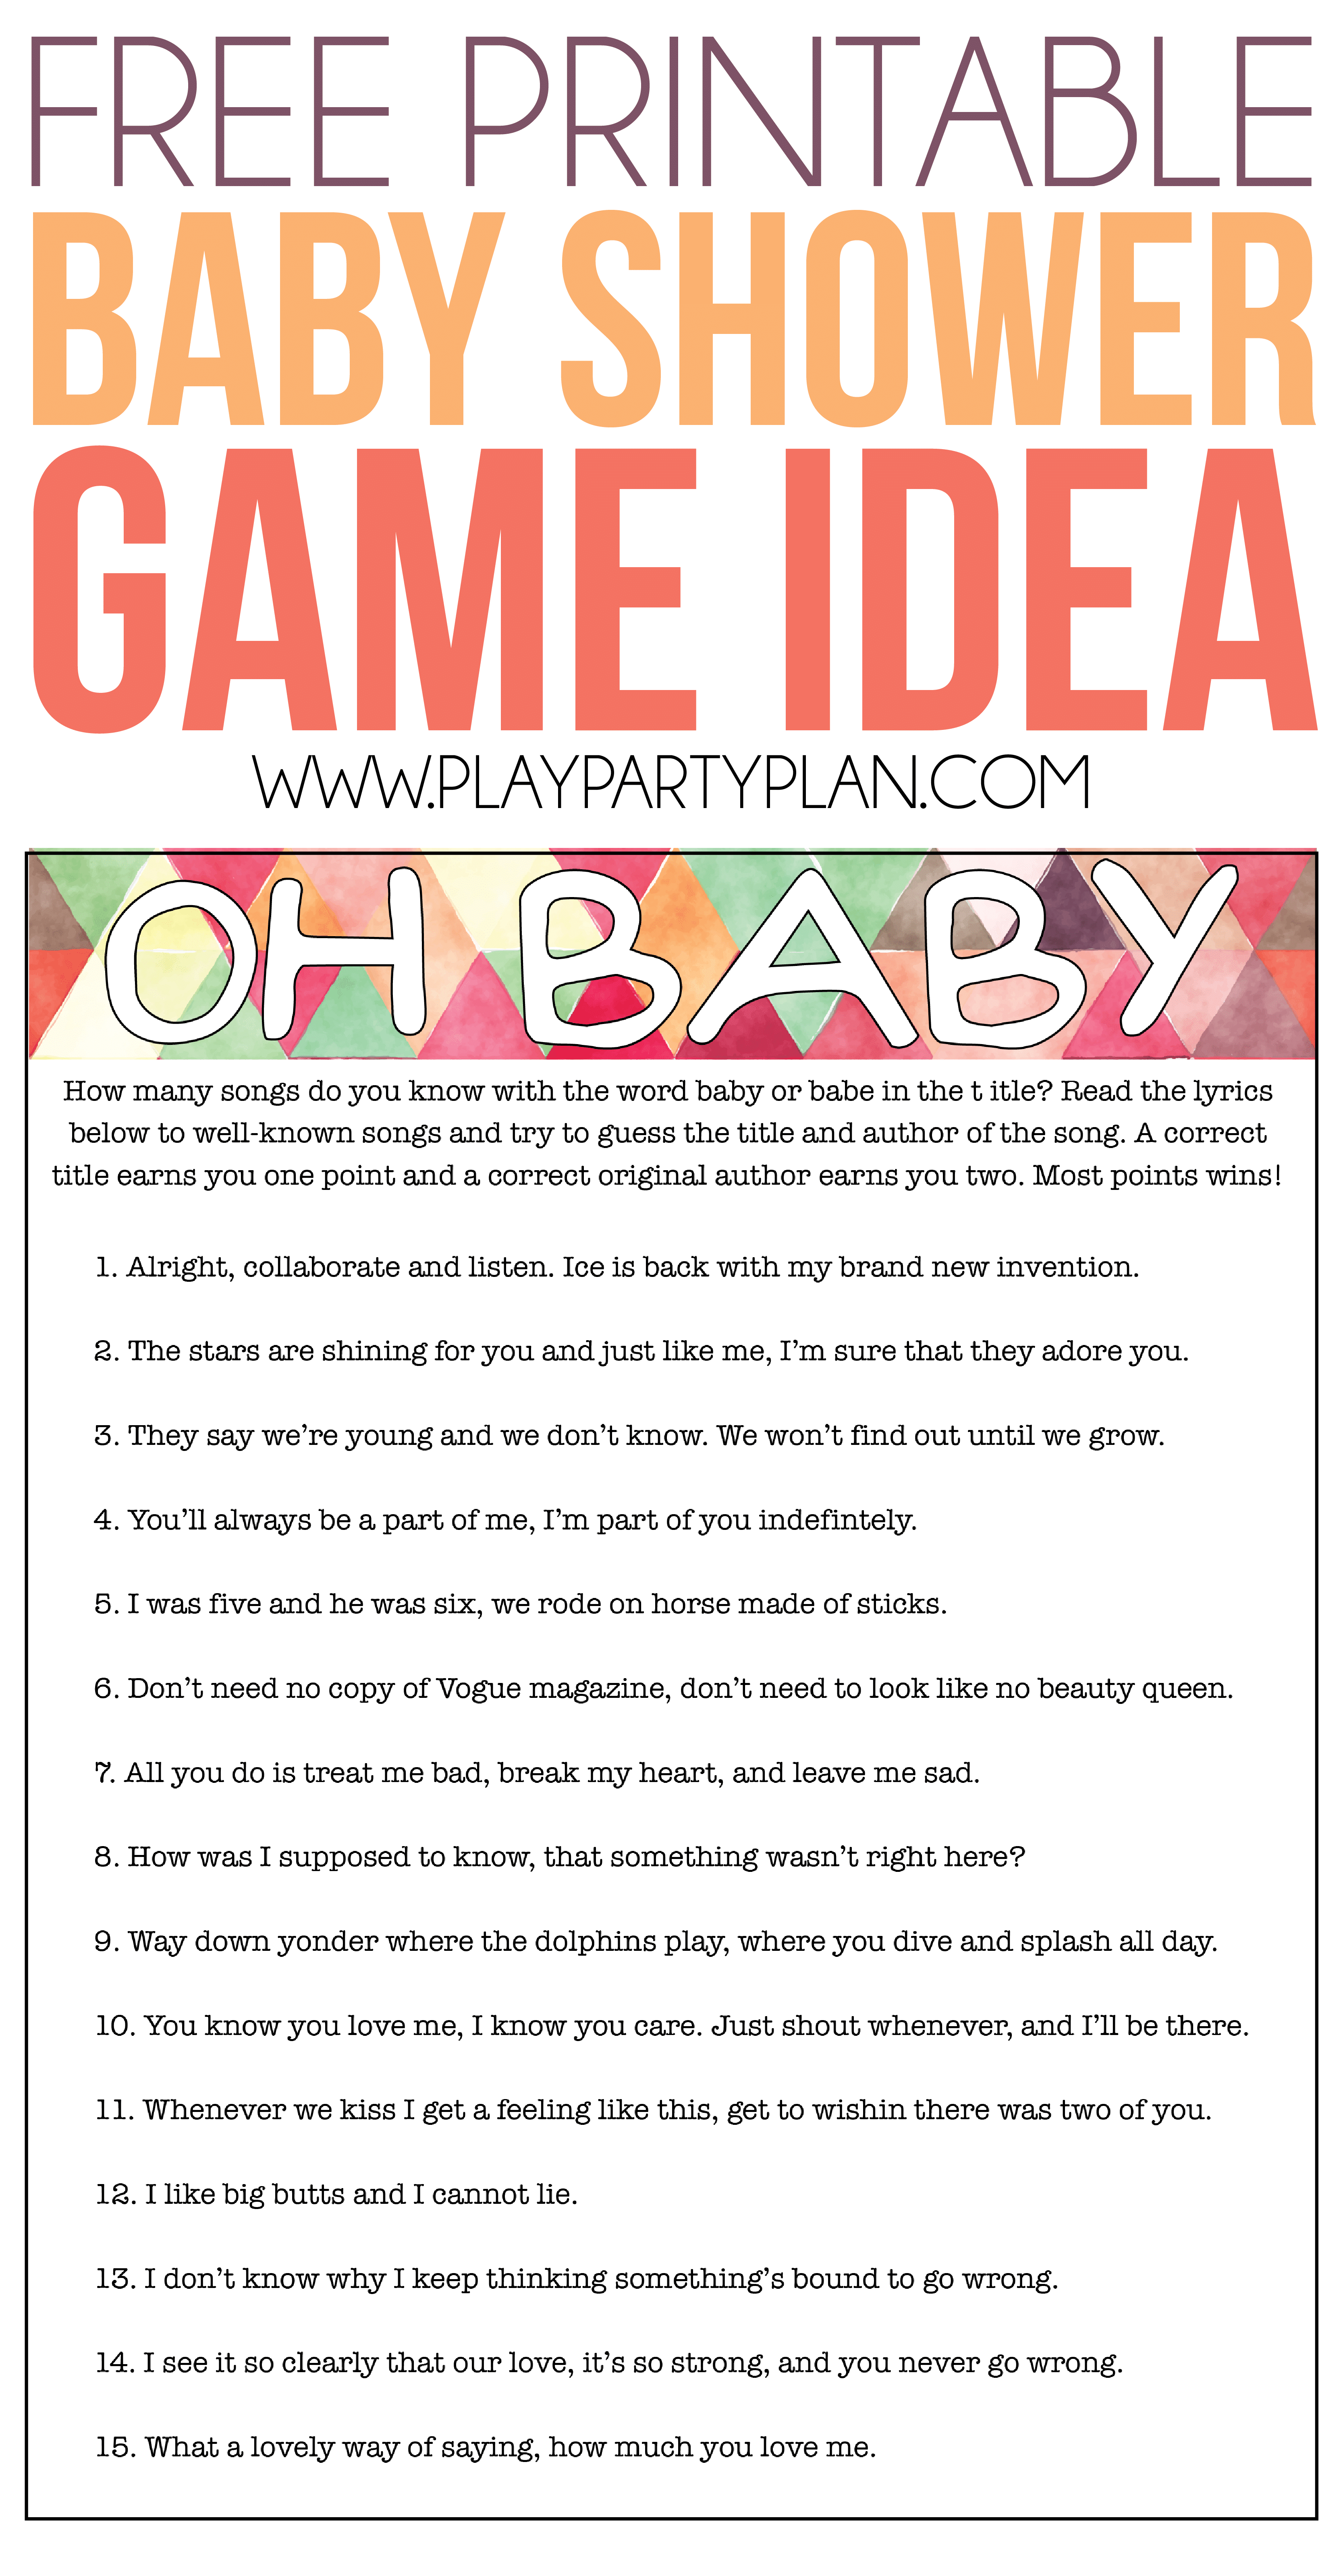 Free Printable Baby Shower Songs Guessing Game - Play Party Plan - Free Printable Baby Shower Games